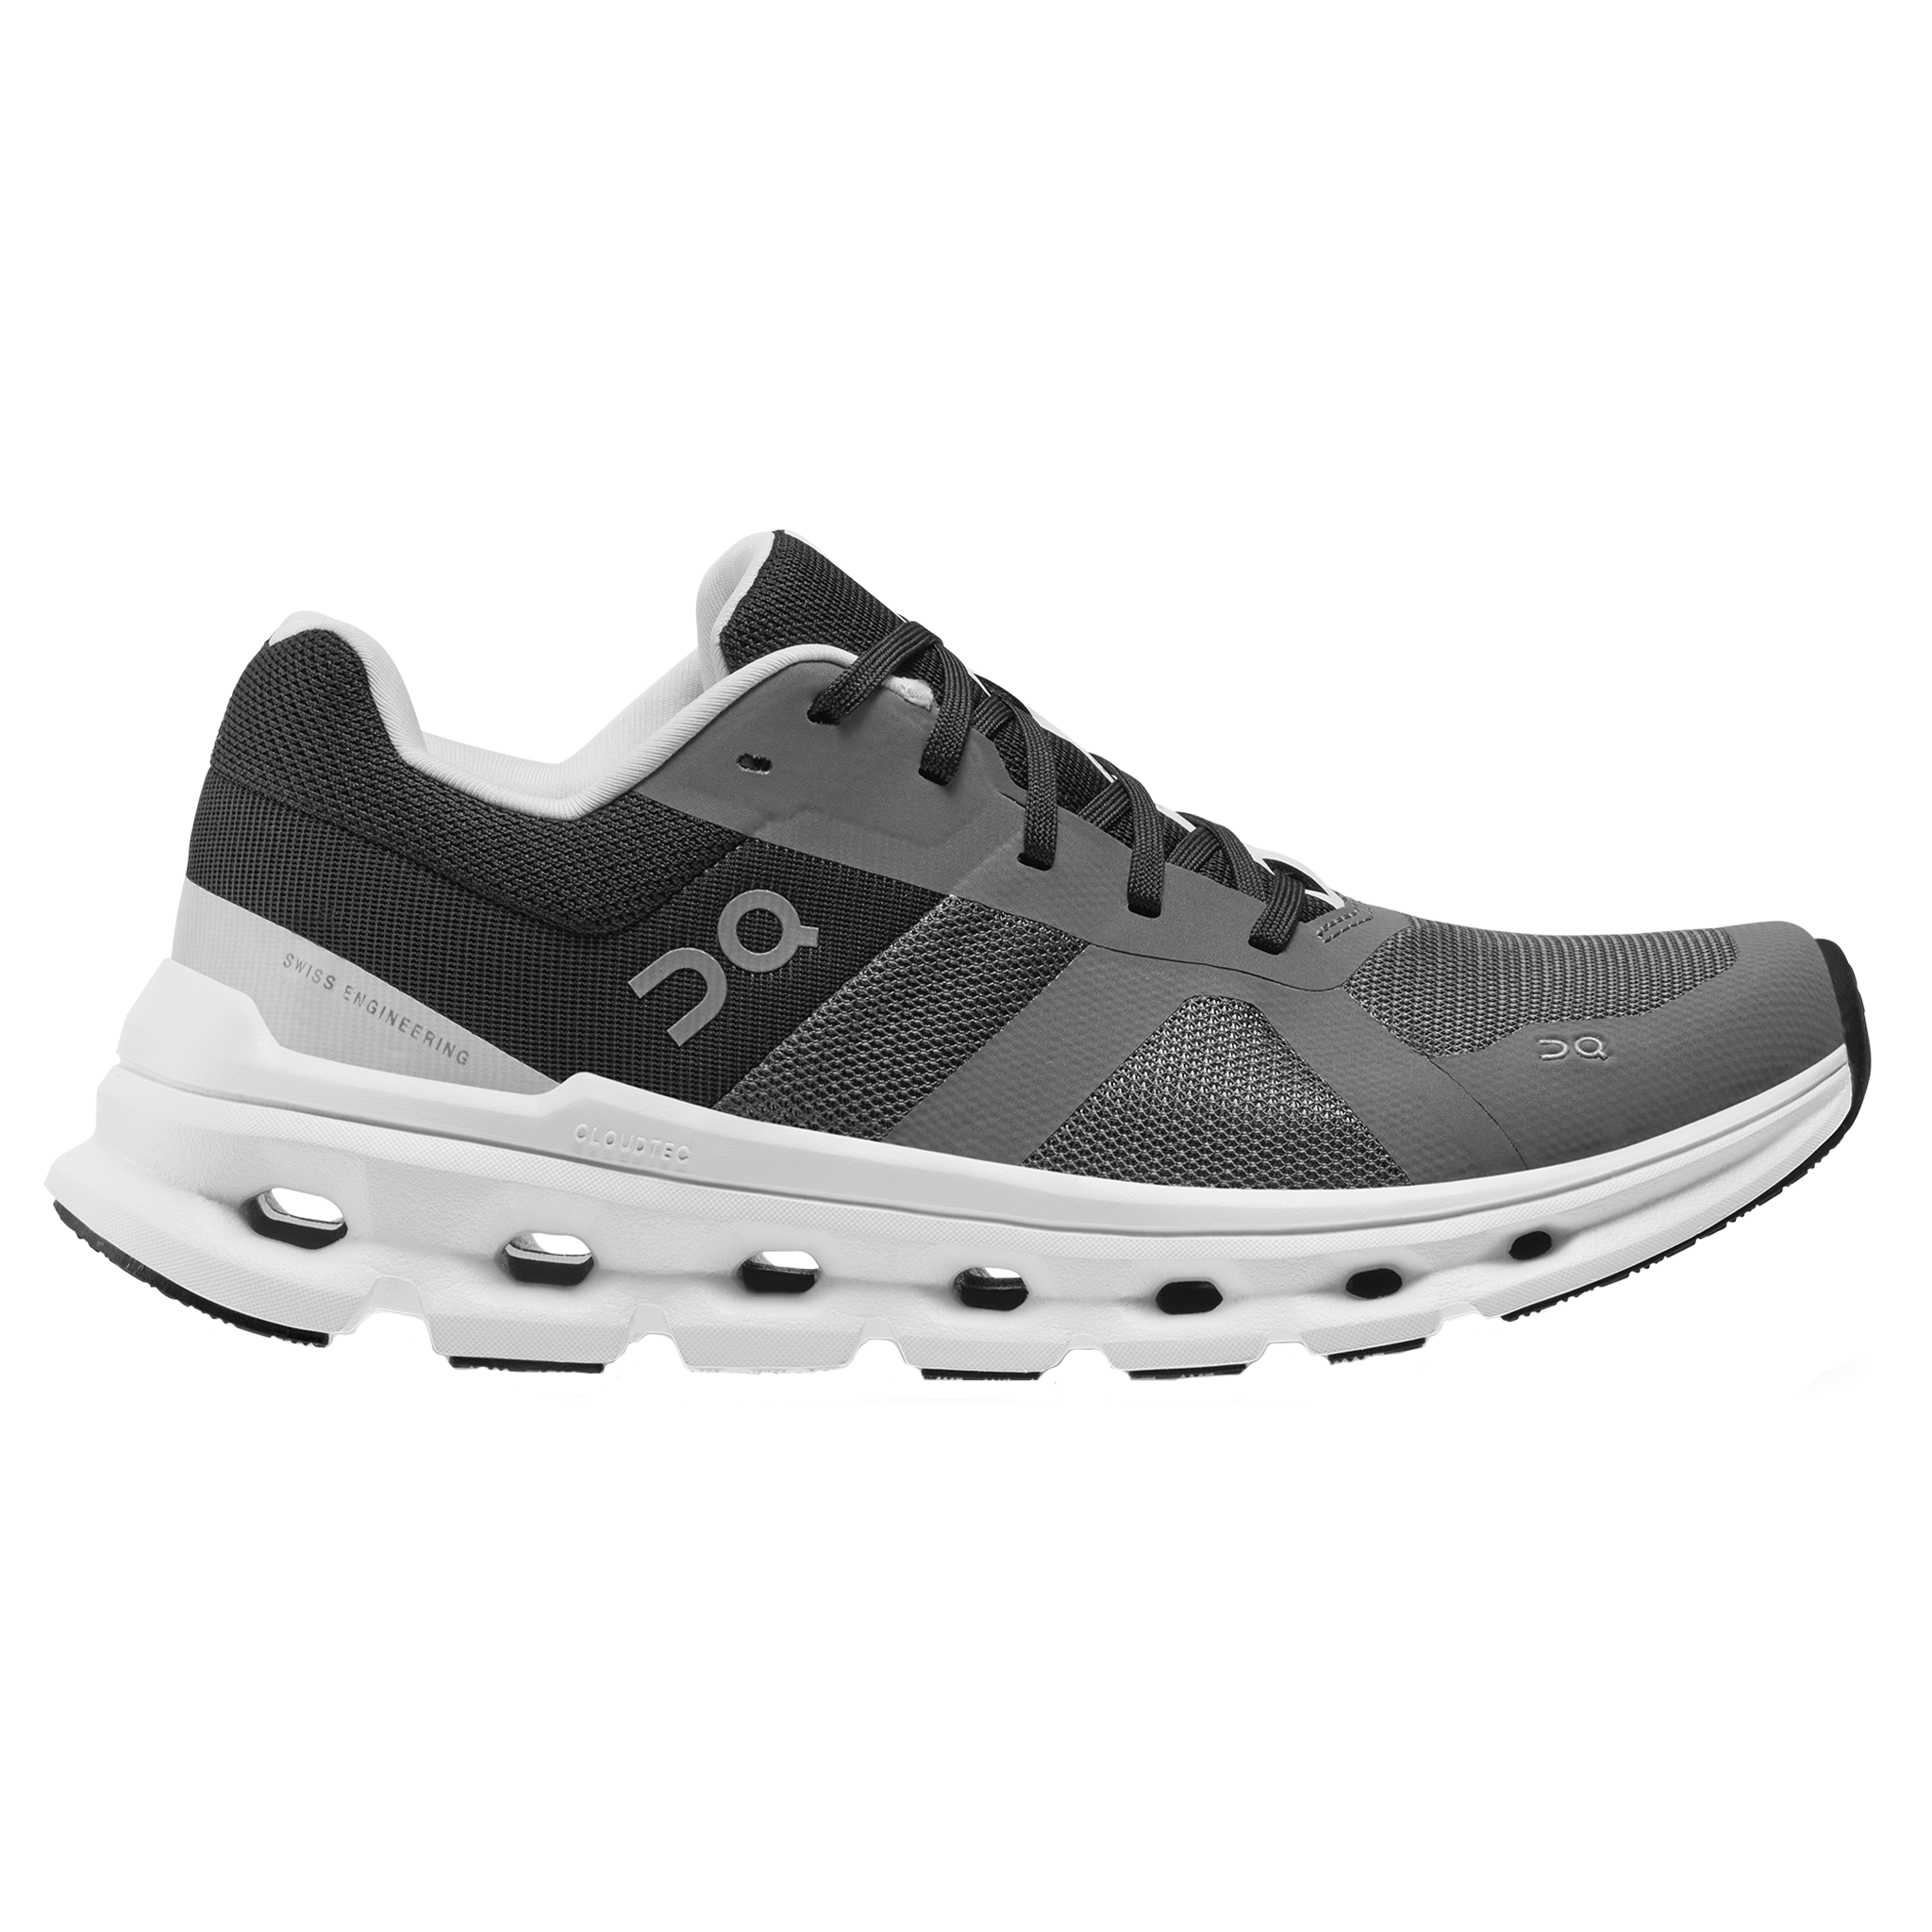 ON Womens Cloudrunner - Eclipse/Black - Stability